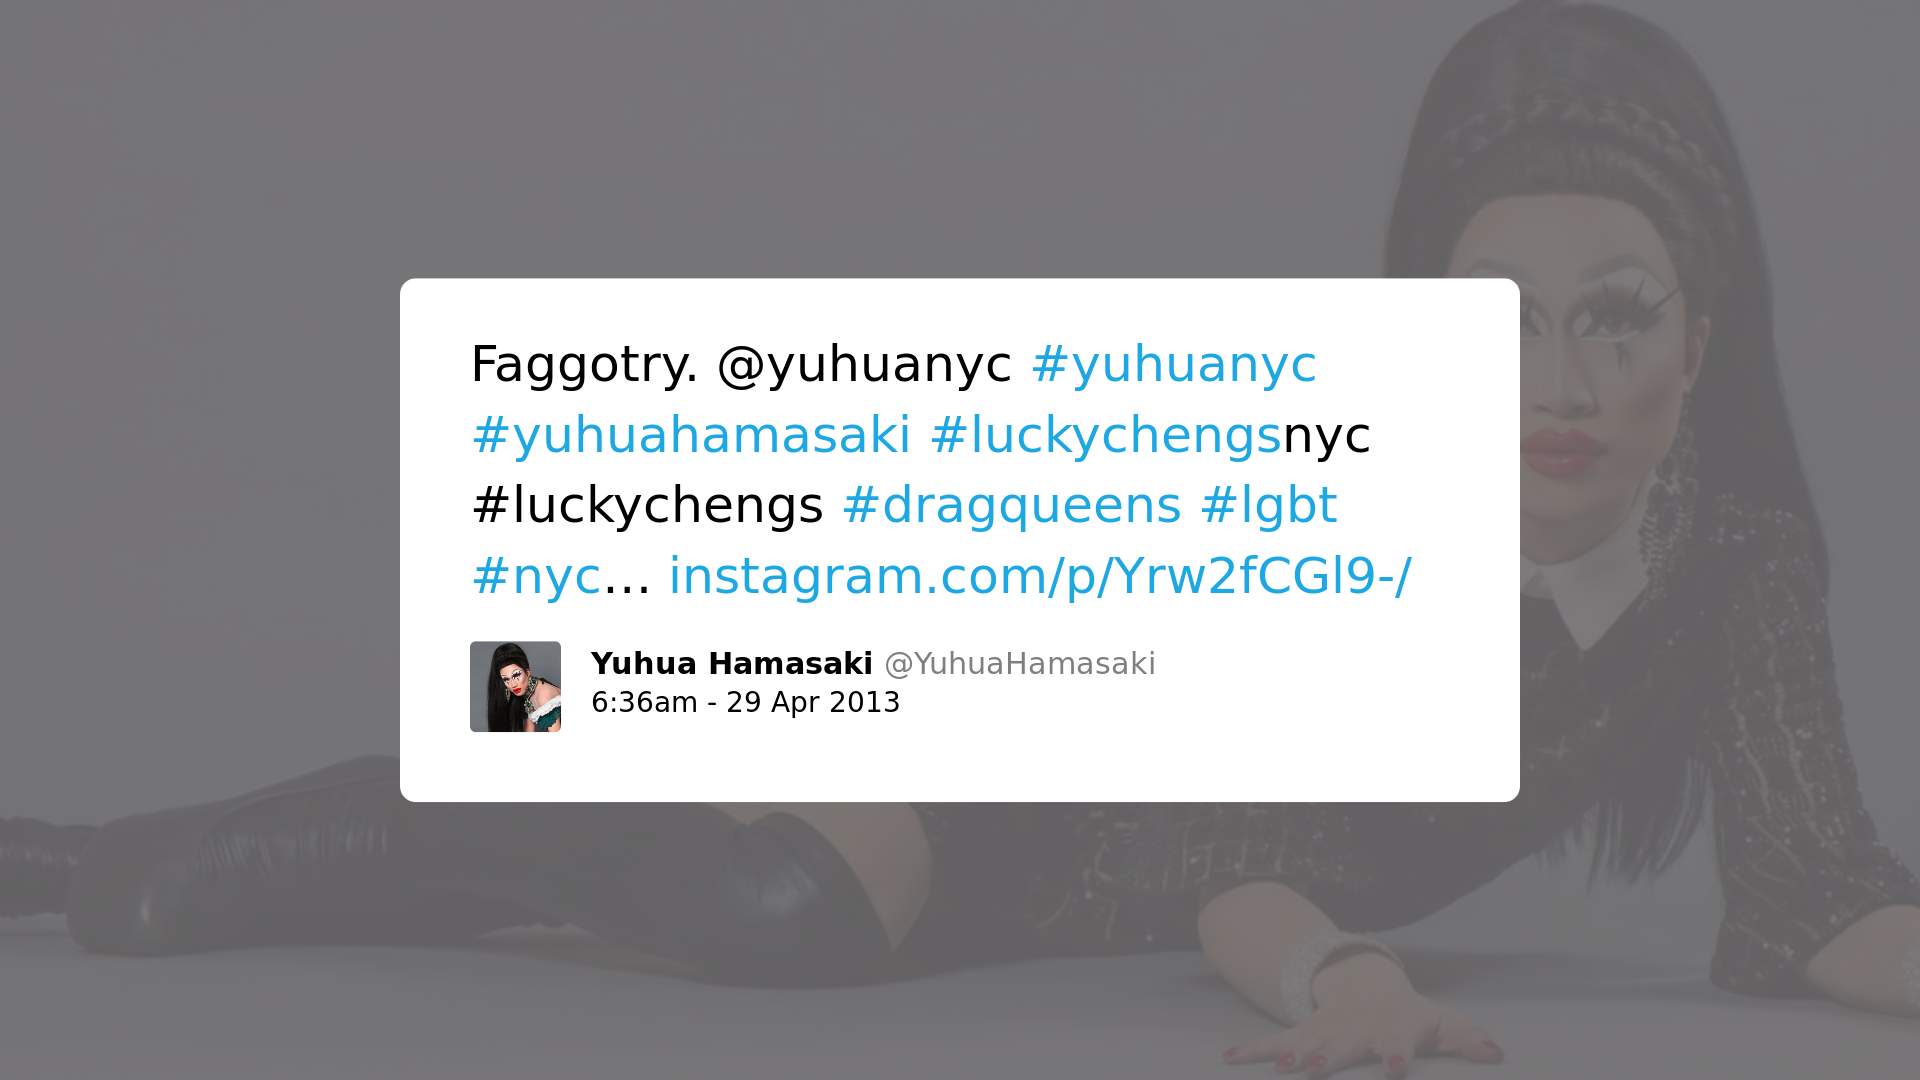 Print screen of a post by Yuhua Hamasaki with the text: Fagottry. @yuhuanyc #yuhuanyc #yuhuahamasaki #luckychengsnyc #luckychengs #dragqueens #lgbt #nyc. 